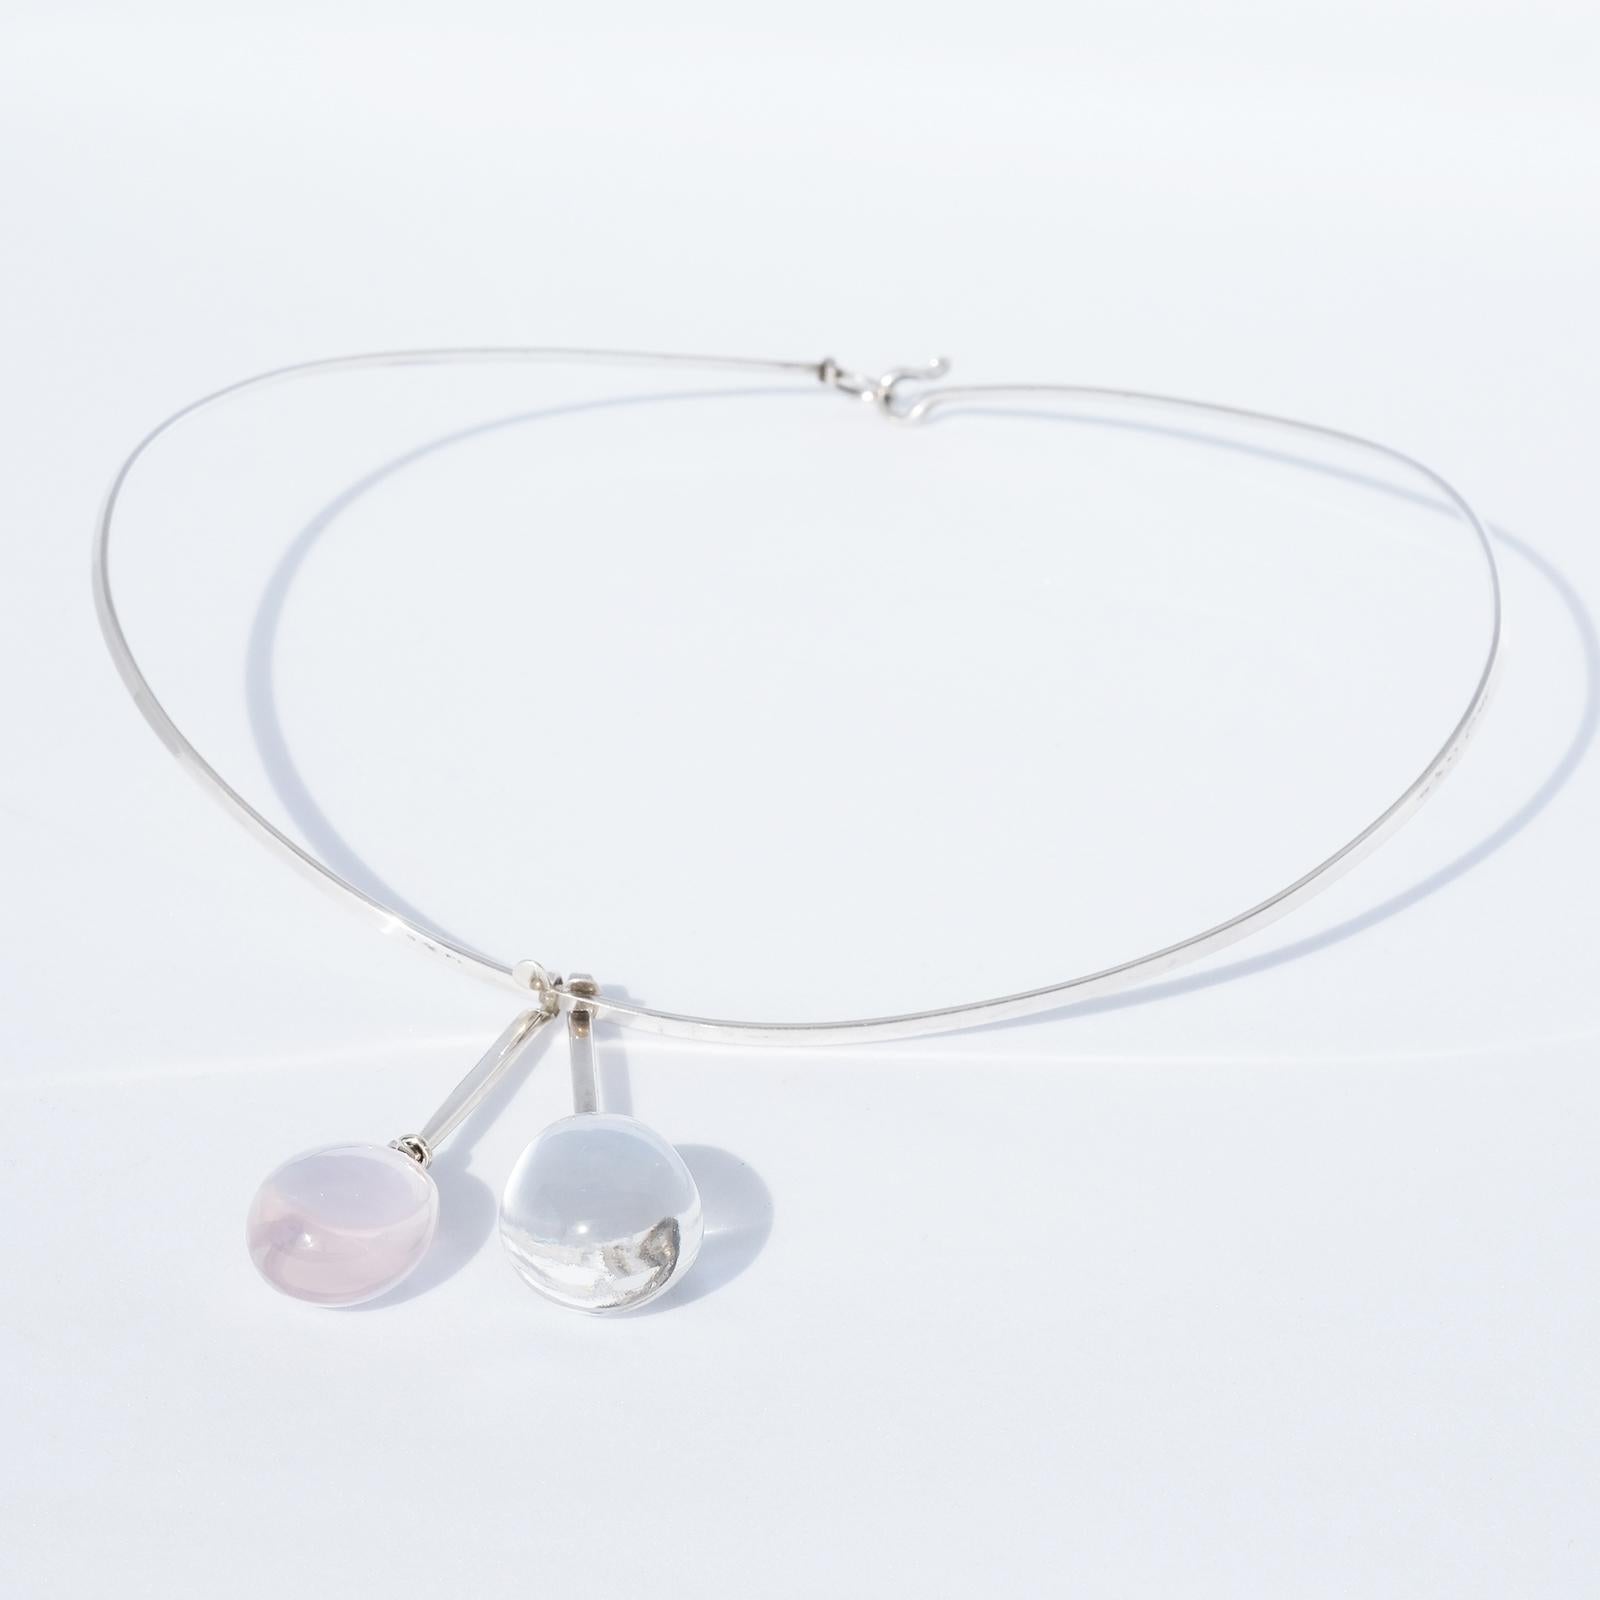 This silver neck ring has a rose quartz and a rock crystal pendant. The rose quartz has an exquisite gentle pink tone whilst the rock crystal is transparent. The neck ring closes easily with a hasp, and the pendants may be worn together or